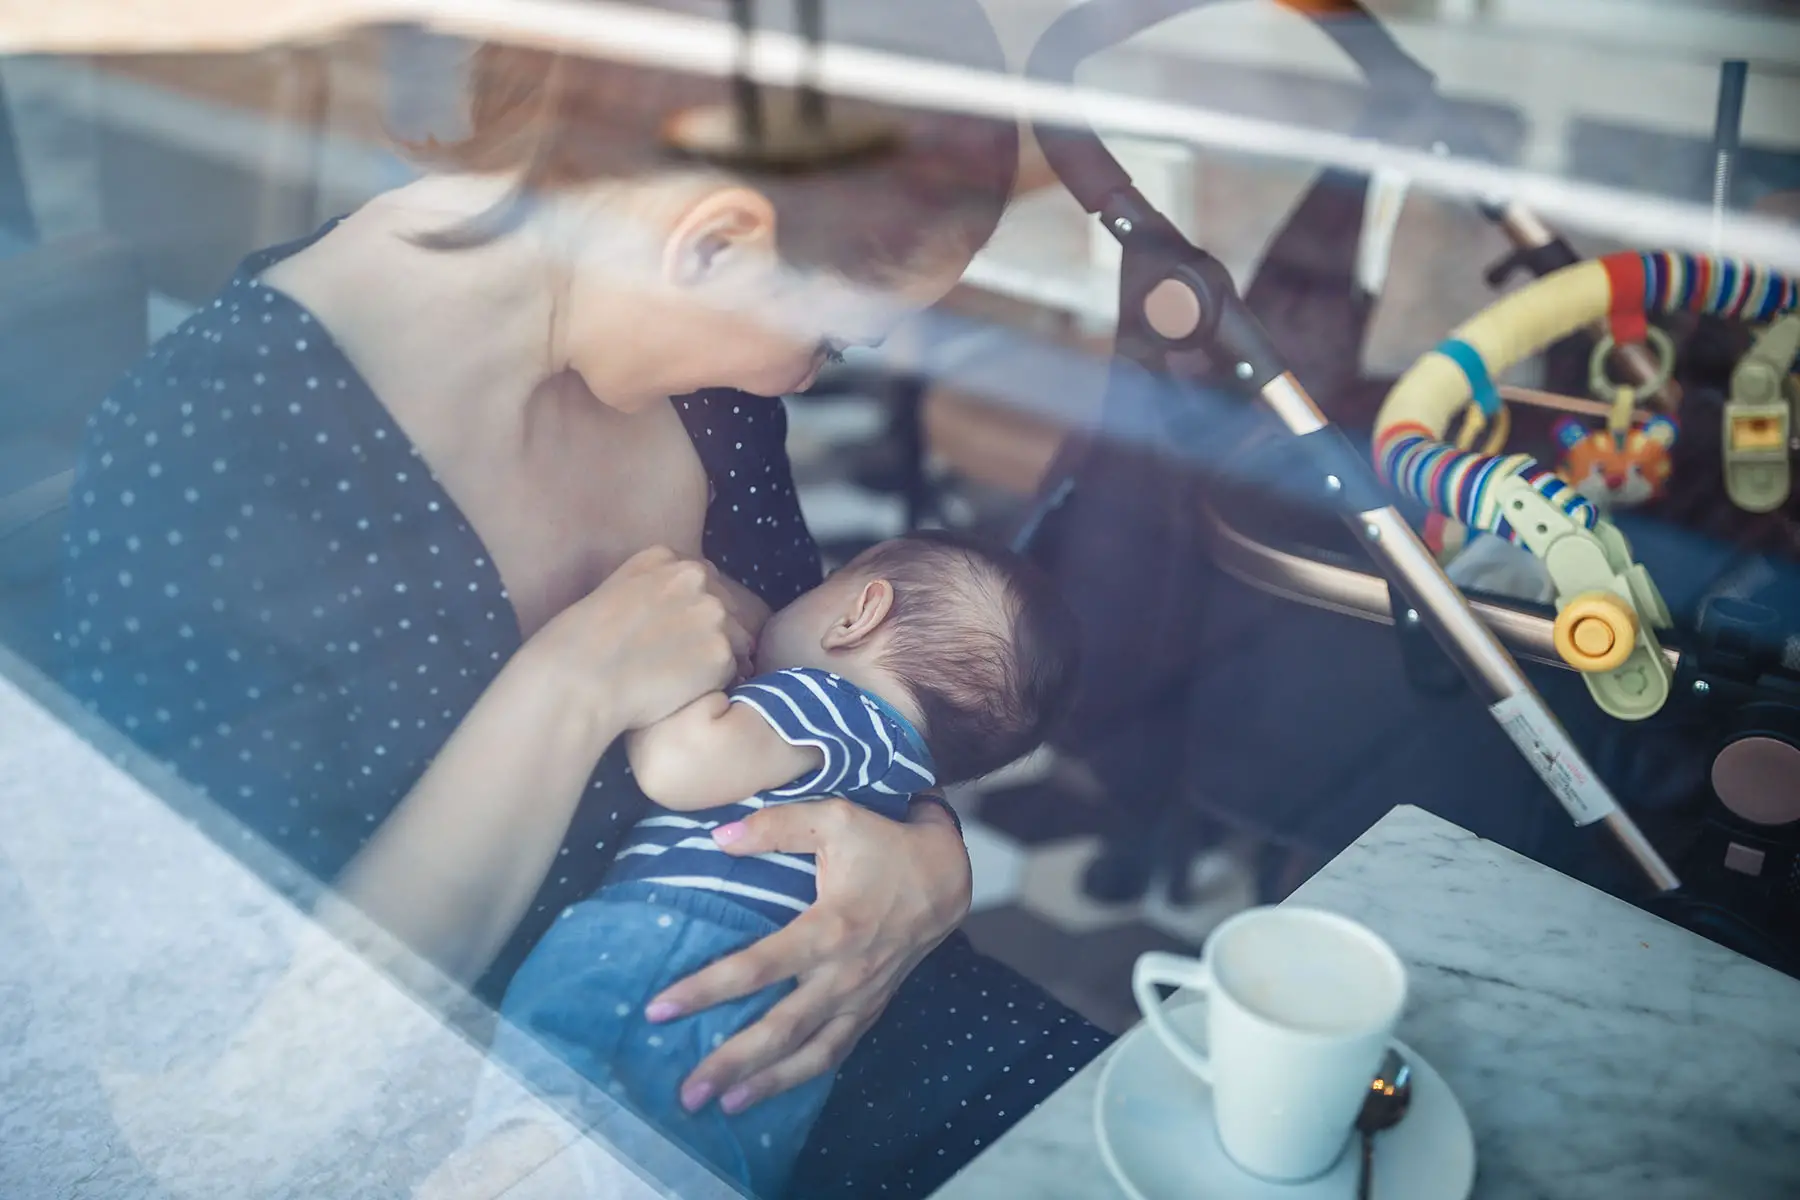 Mother breastfeeding her baby in a restaurant. Photo taken from outside.